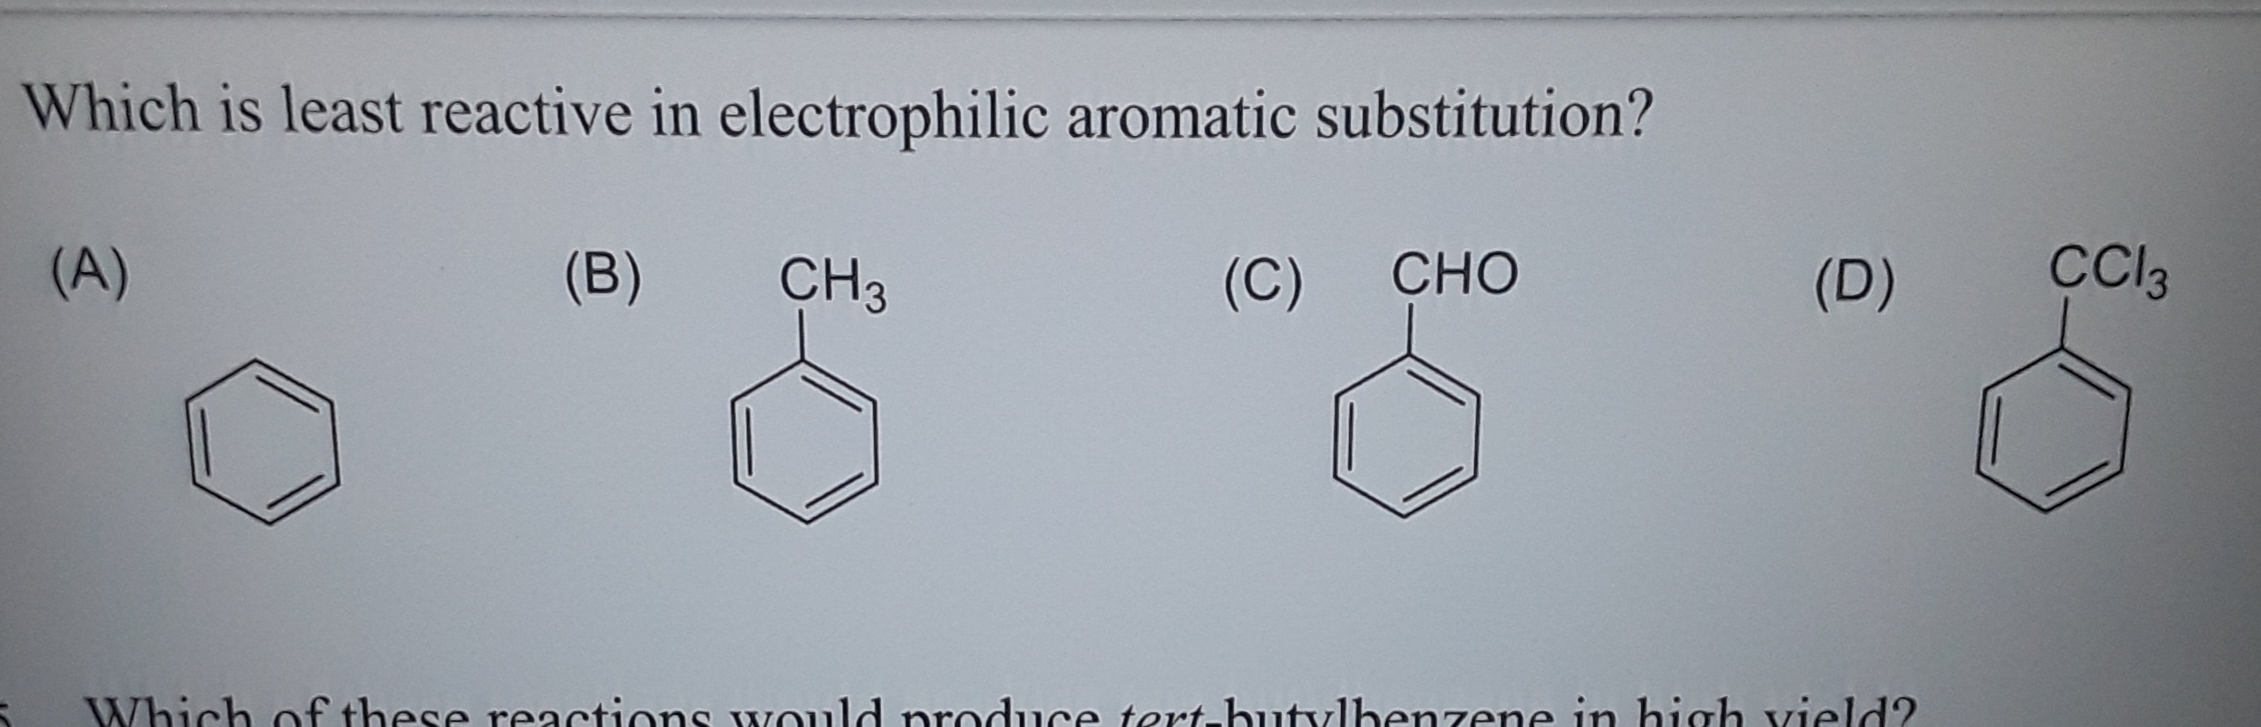 Which is least reactive in electrophilic aromatic substitution?
(A)
(B)
CH3
(C)
CHO
(D)
C3
